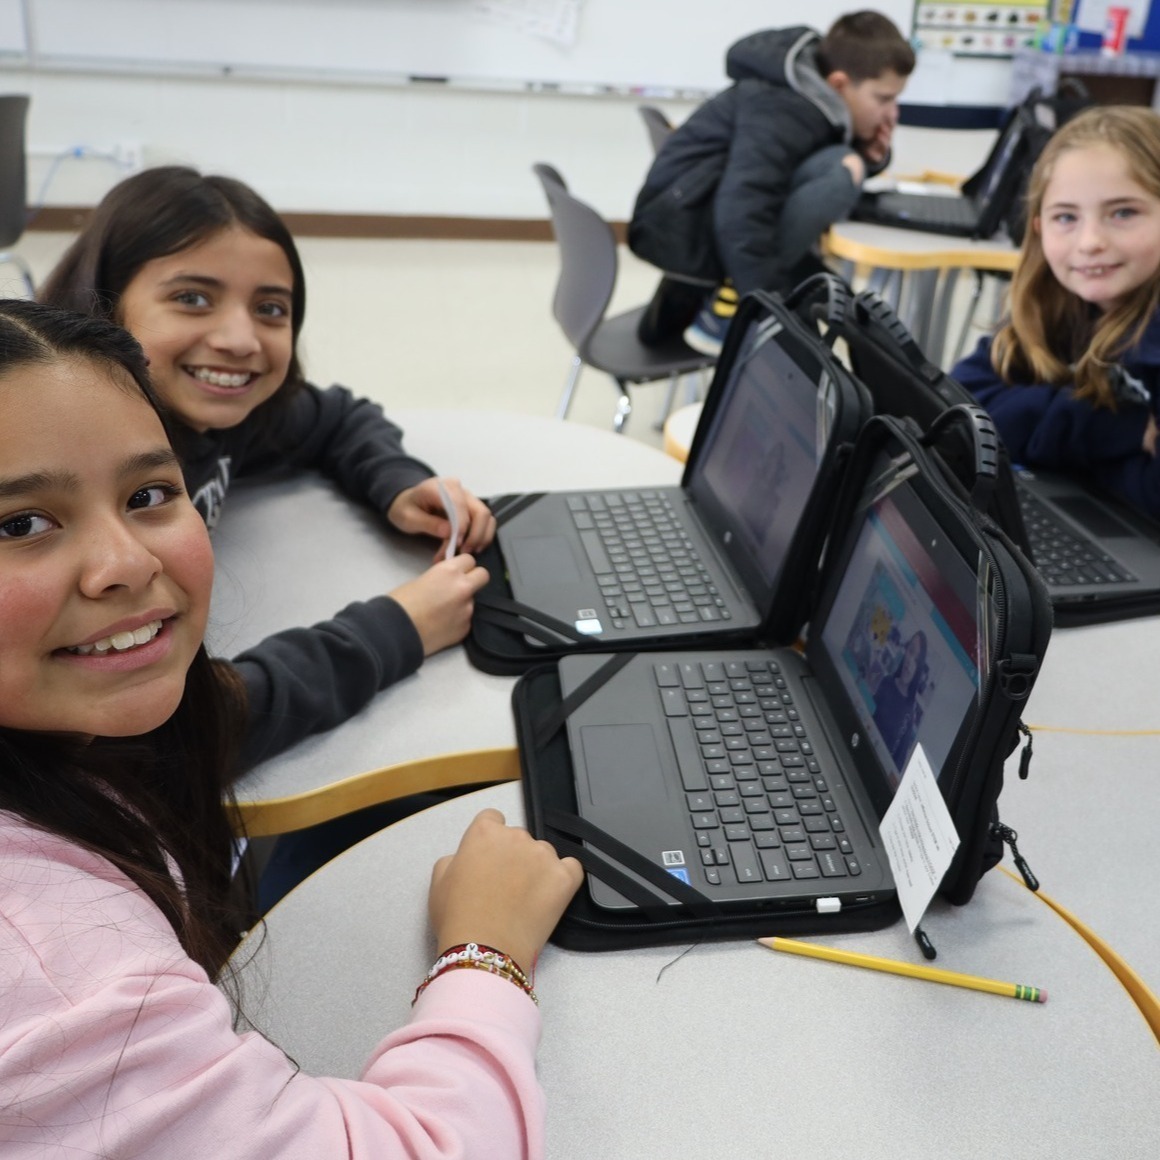 Students using laptops smiling